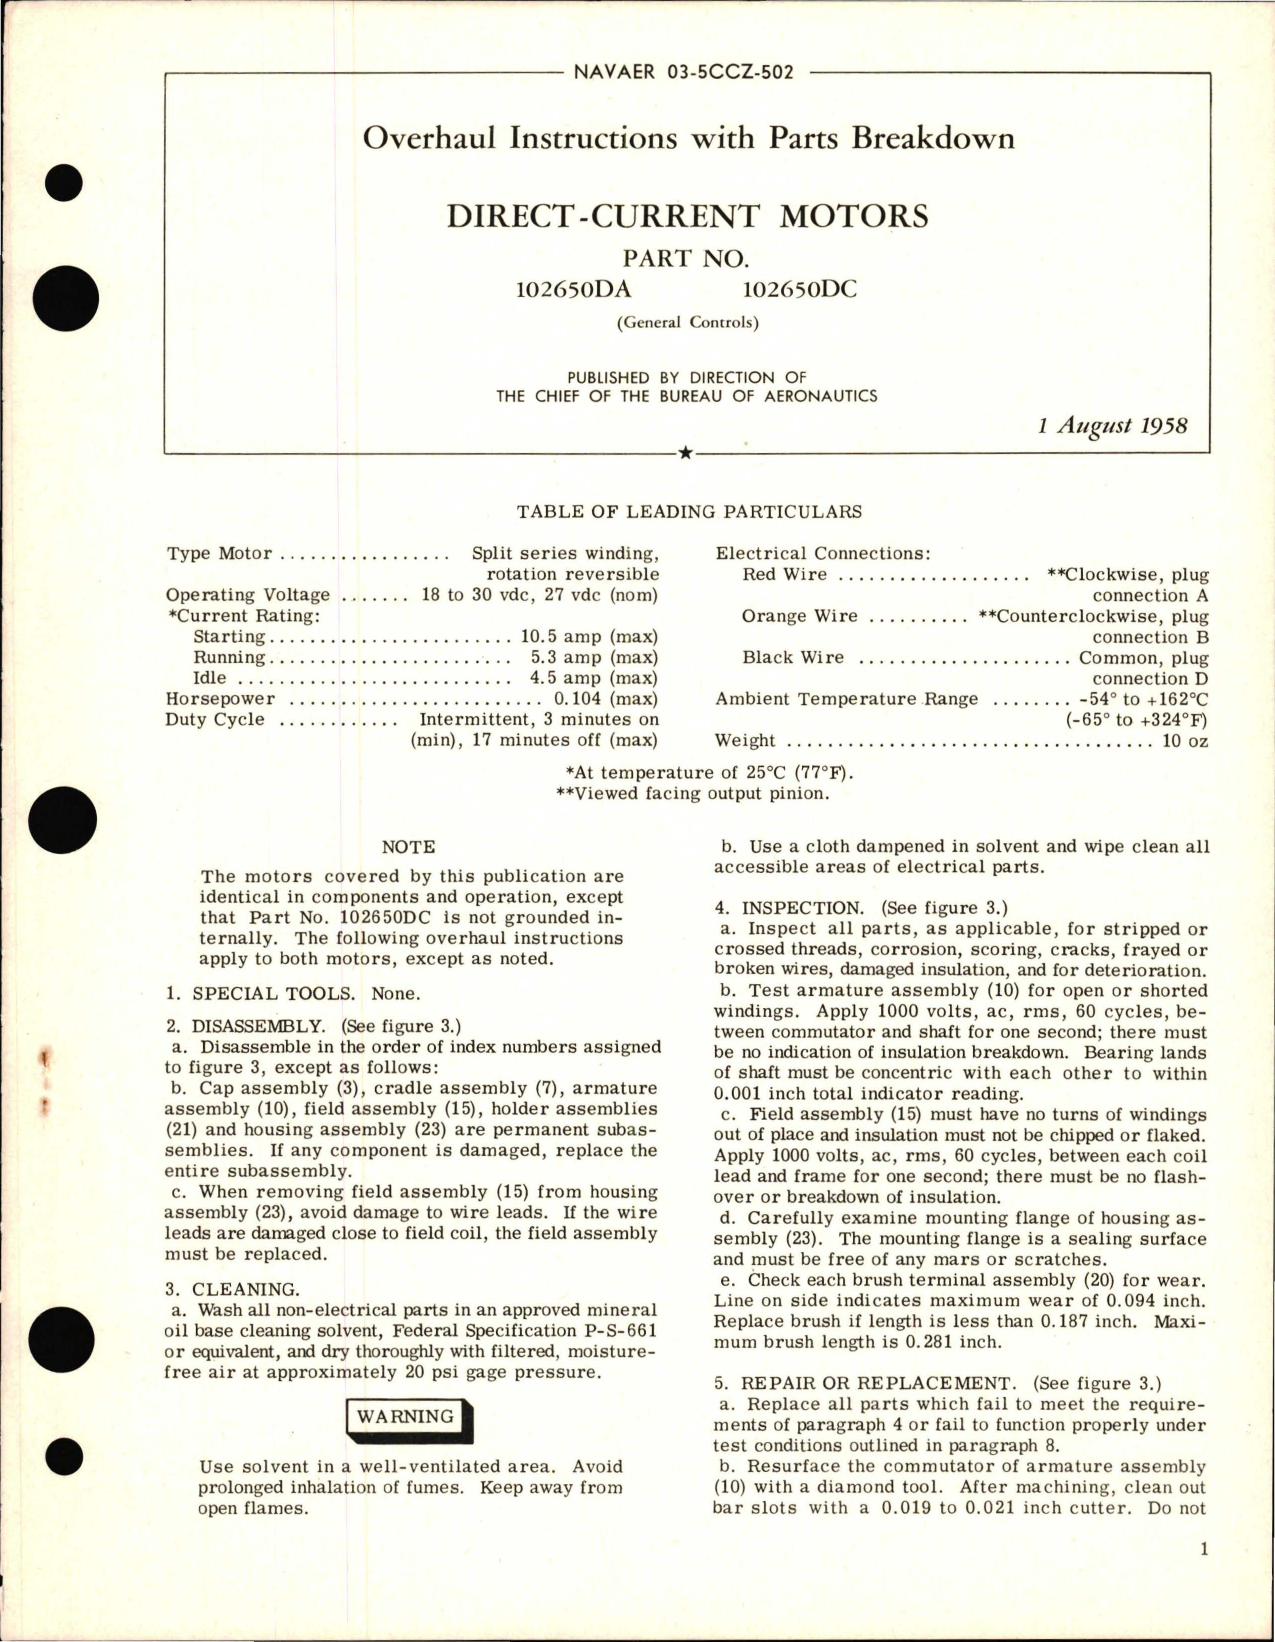 Sample page 1 from AirCorps Library document: Overhaul Instructions with Parts Breakdown for Direct Current Motors - Part 102650DA and 102650DC